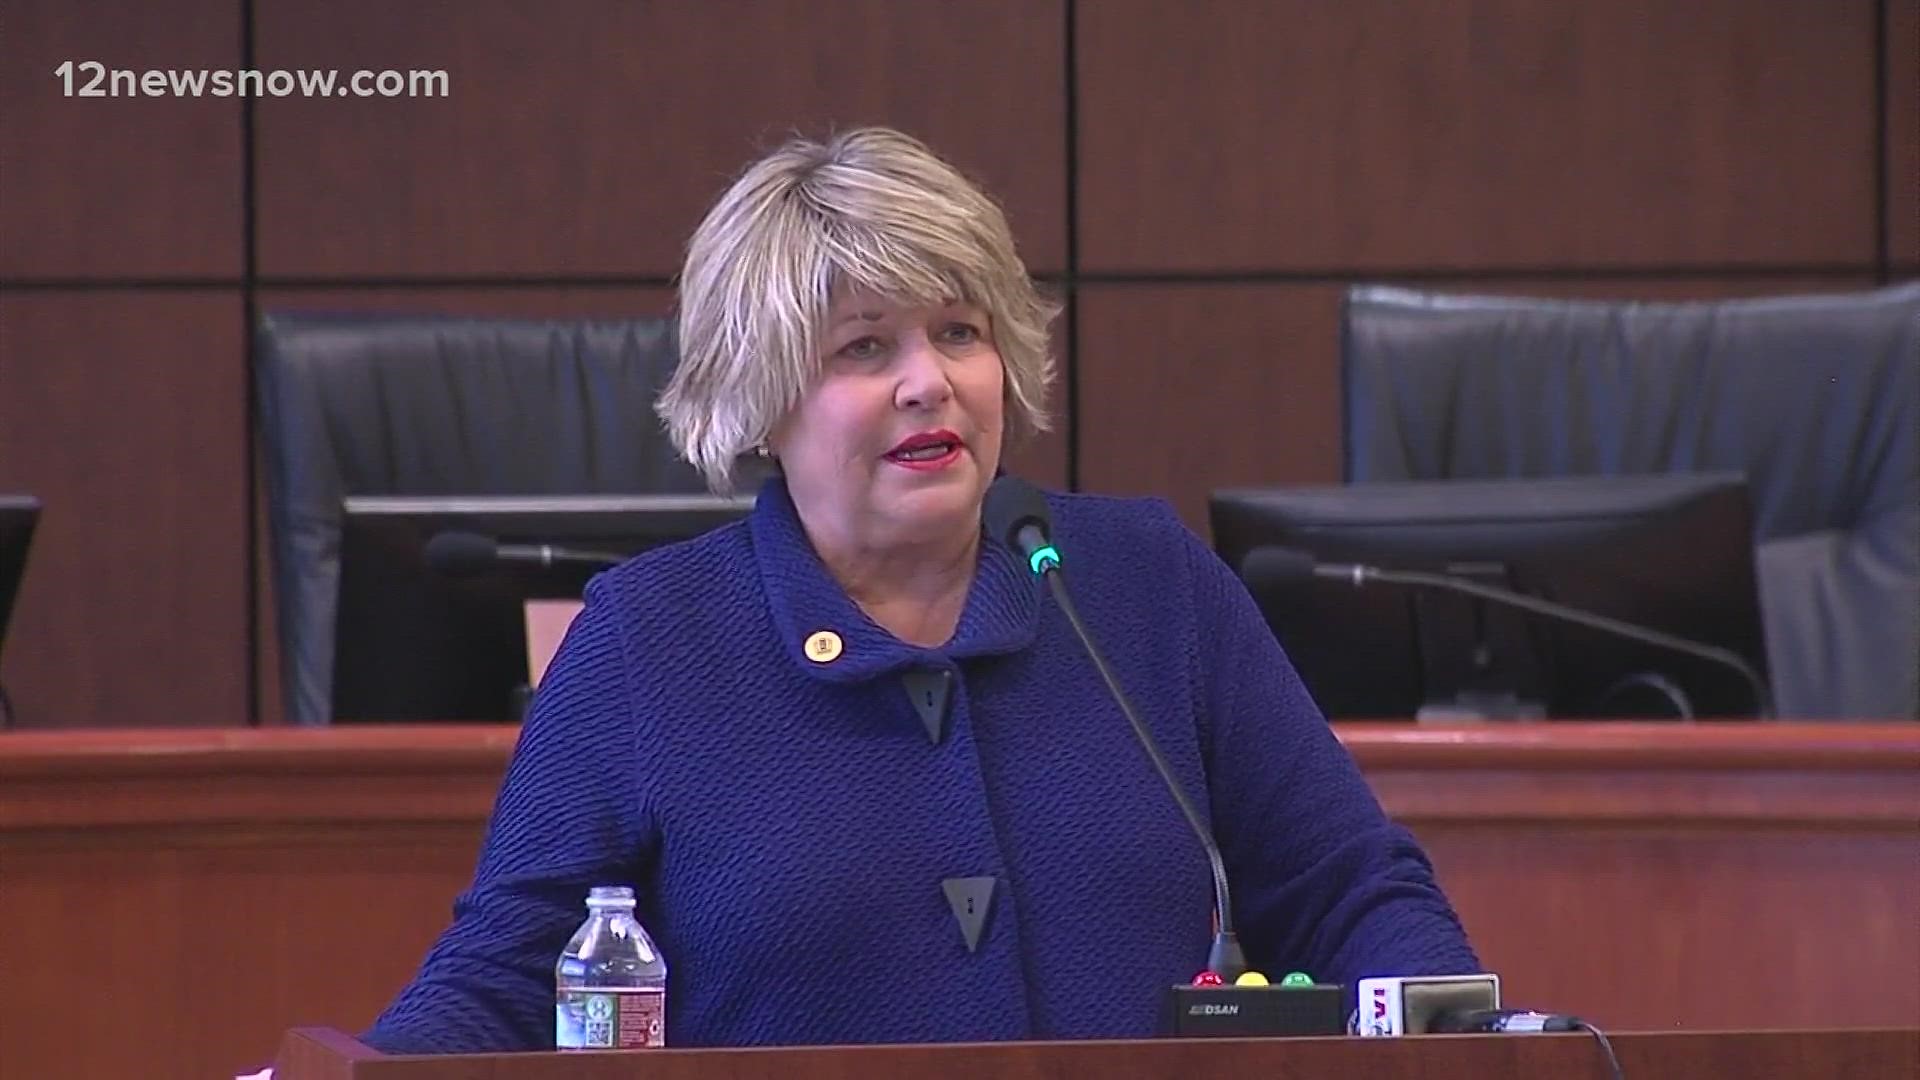 In a January 13, 2021, news conference, Beaumont Mayor Becky Ames announced she will not run for office again after more than 27 years serving the city.